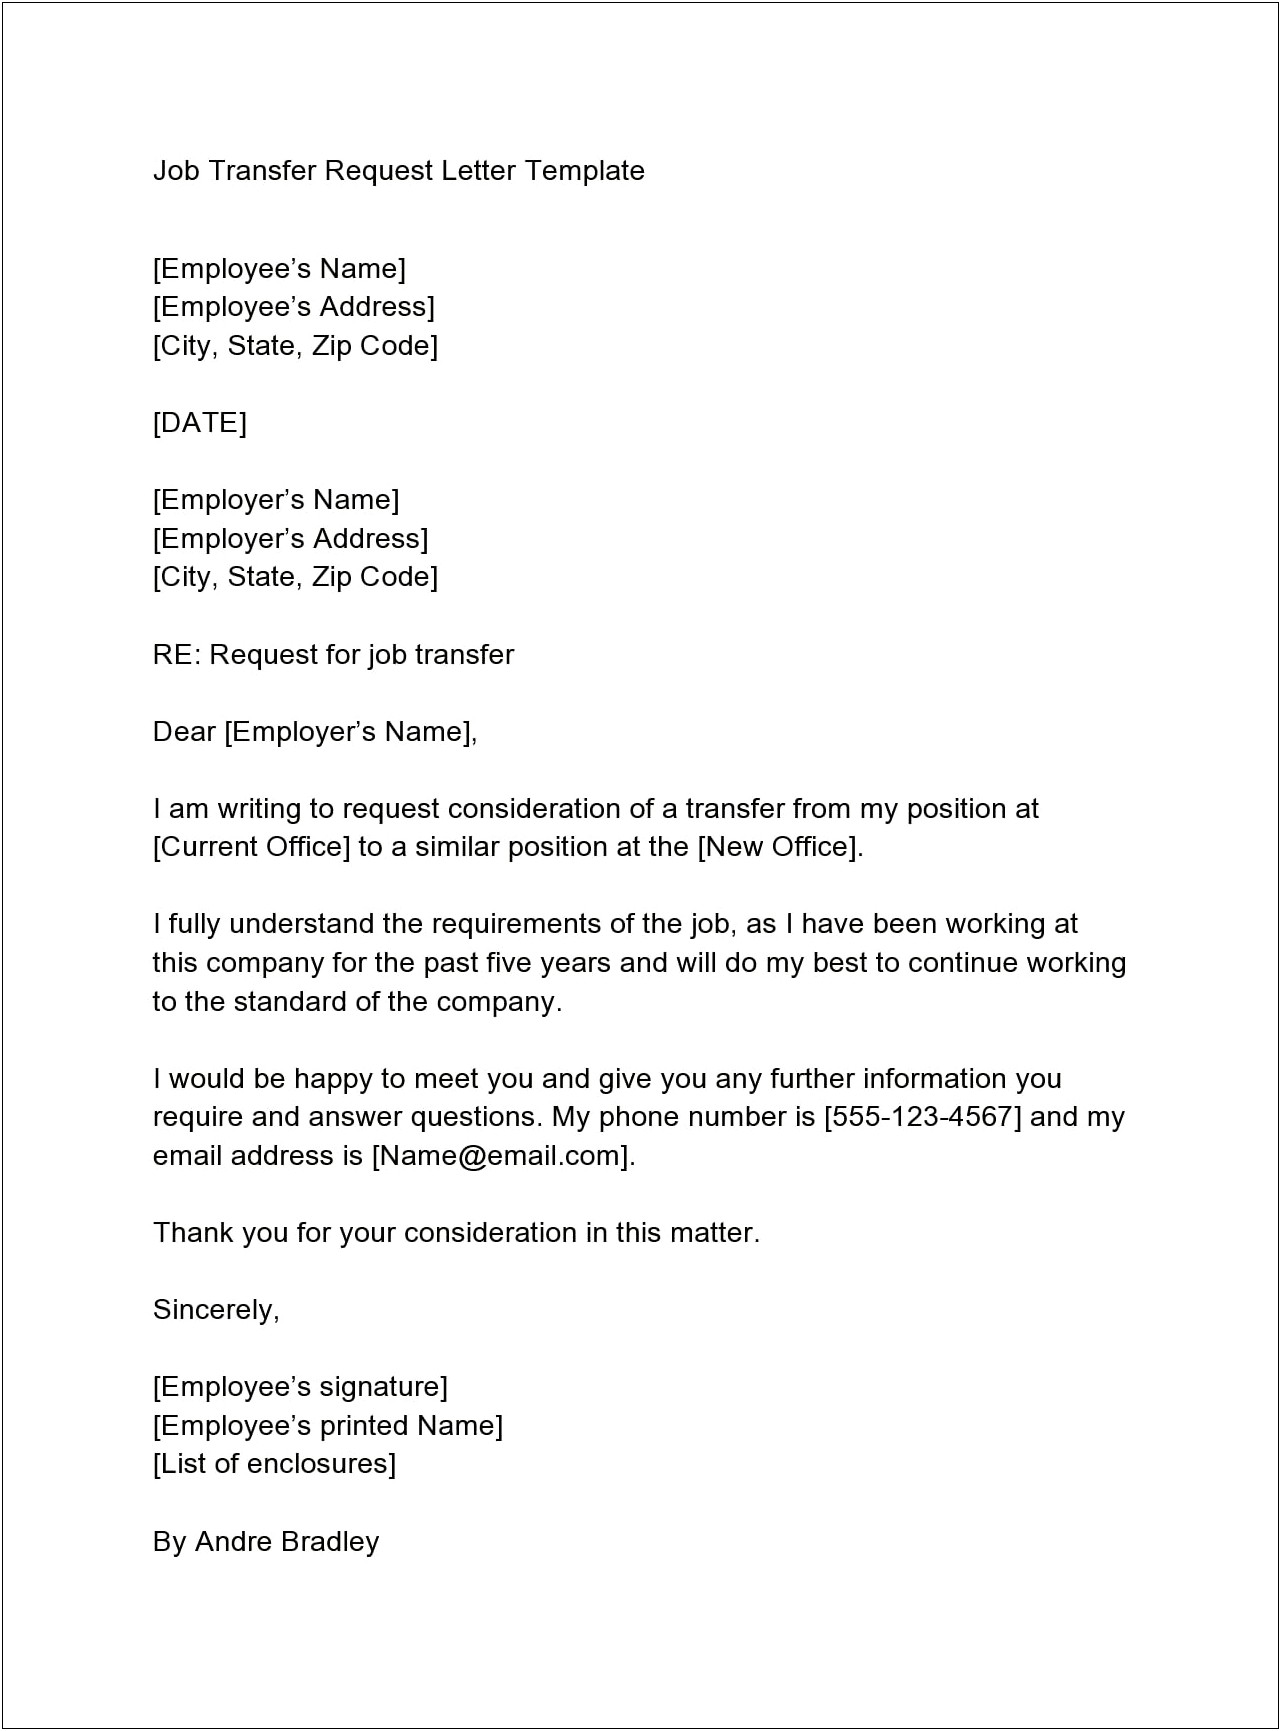 Free Transfer Of Ownership Letter Template